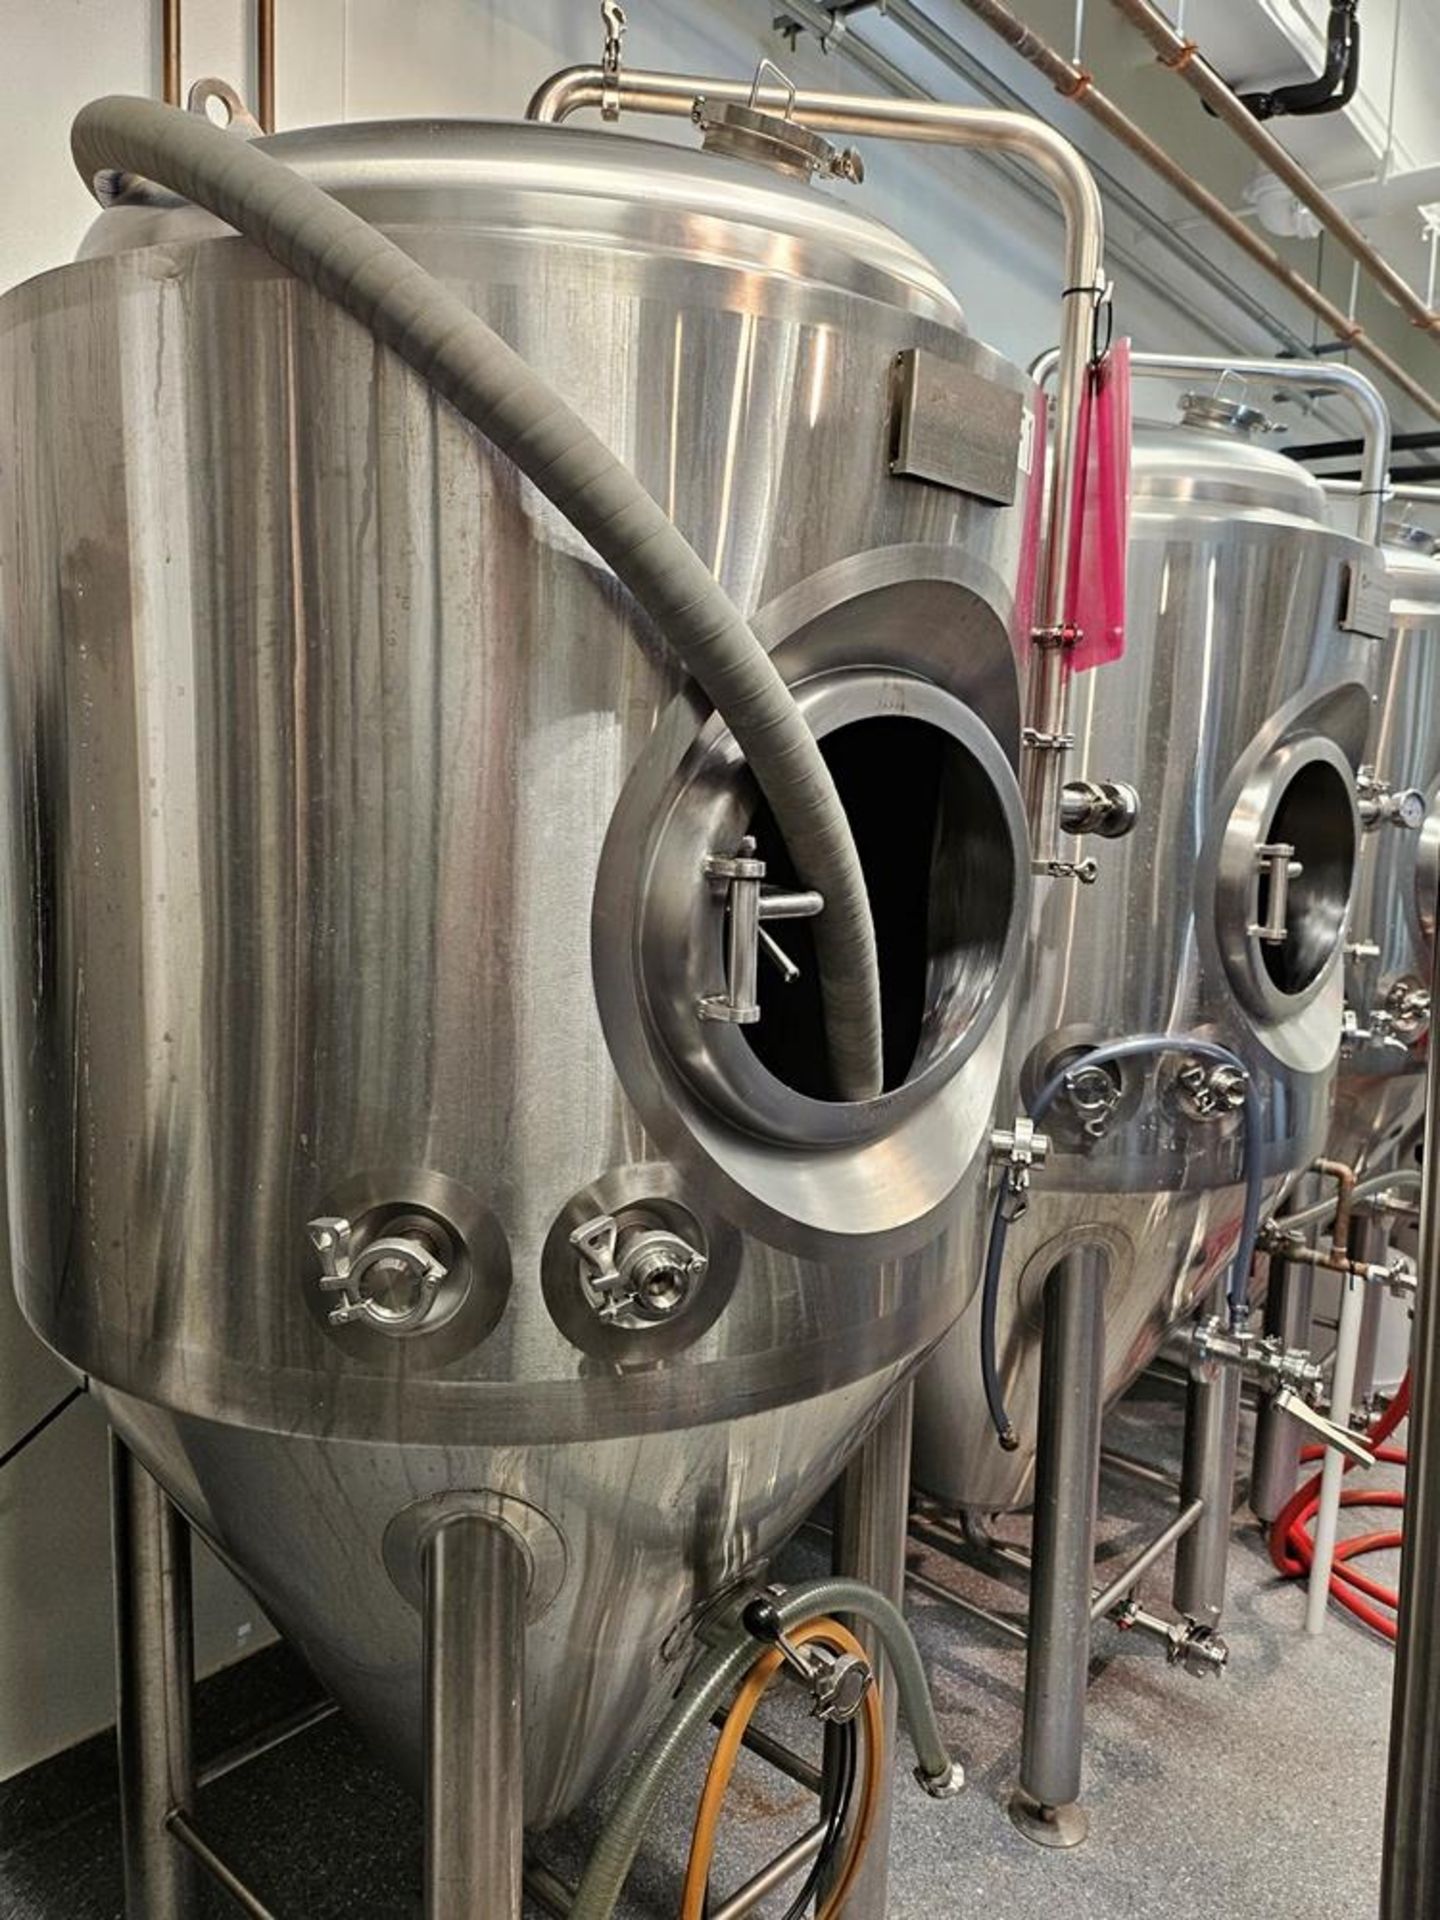 Complete Brewery - 5 barrel NFE system, walking cooler, tap system and more - Image 33 of 80